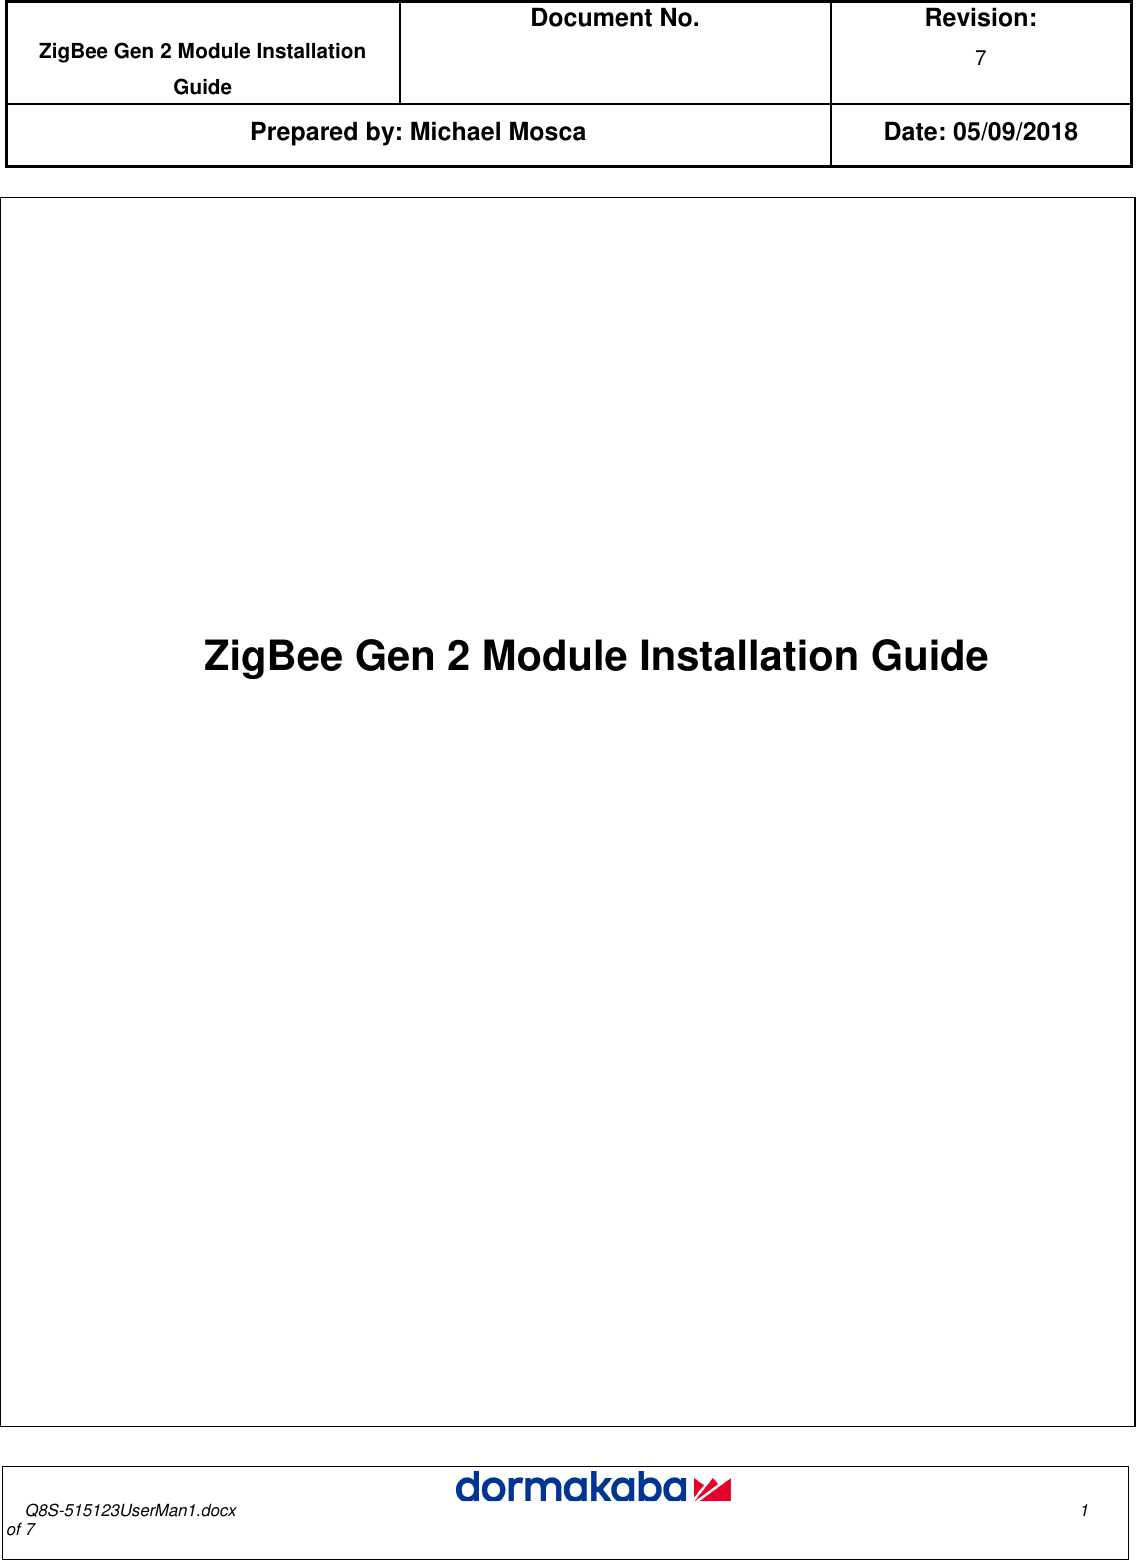  ZigBee Gen 2 Module Installation Guide Document No.  Revision: 7  Prepared by: Michael Mosca Date: 05/09/2018                   Q8S-515123UserMan1.docx                                                                                                                                                                                      1 of 7                 ZigBee Gen 2 Module Installation Guide                       